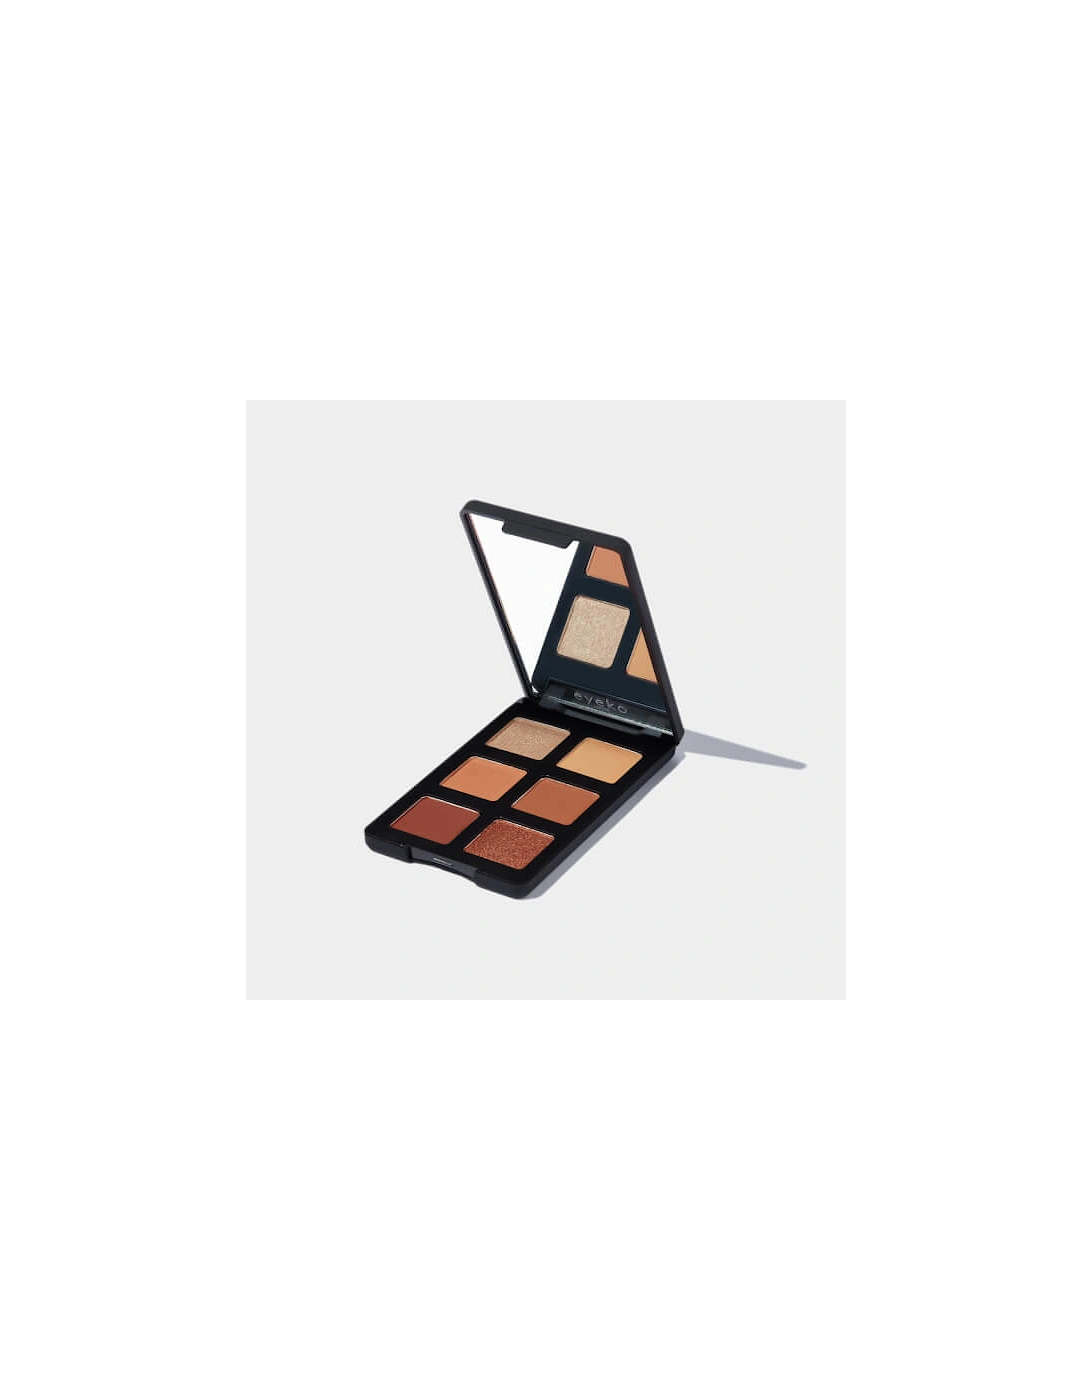 Limitless Eyeshadow Palette 2, 2 of 1